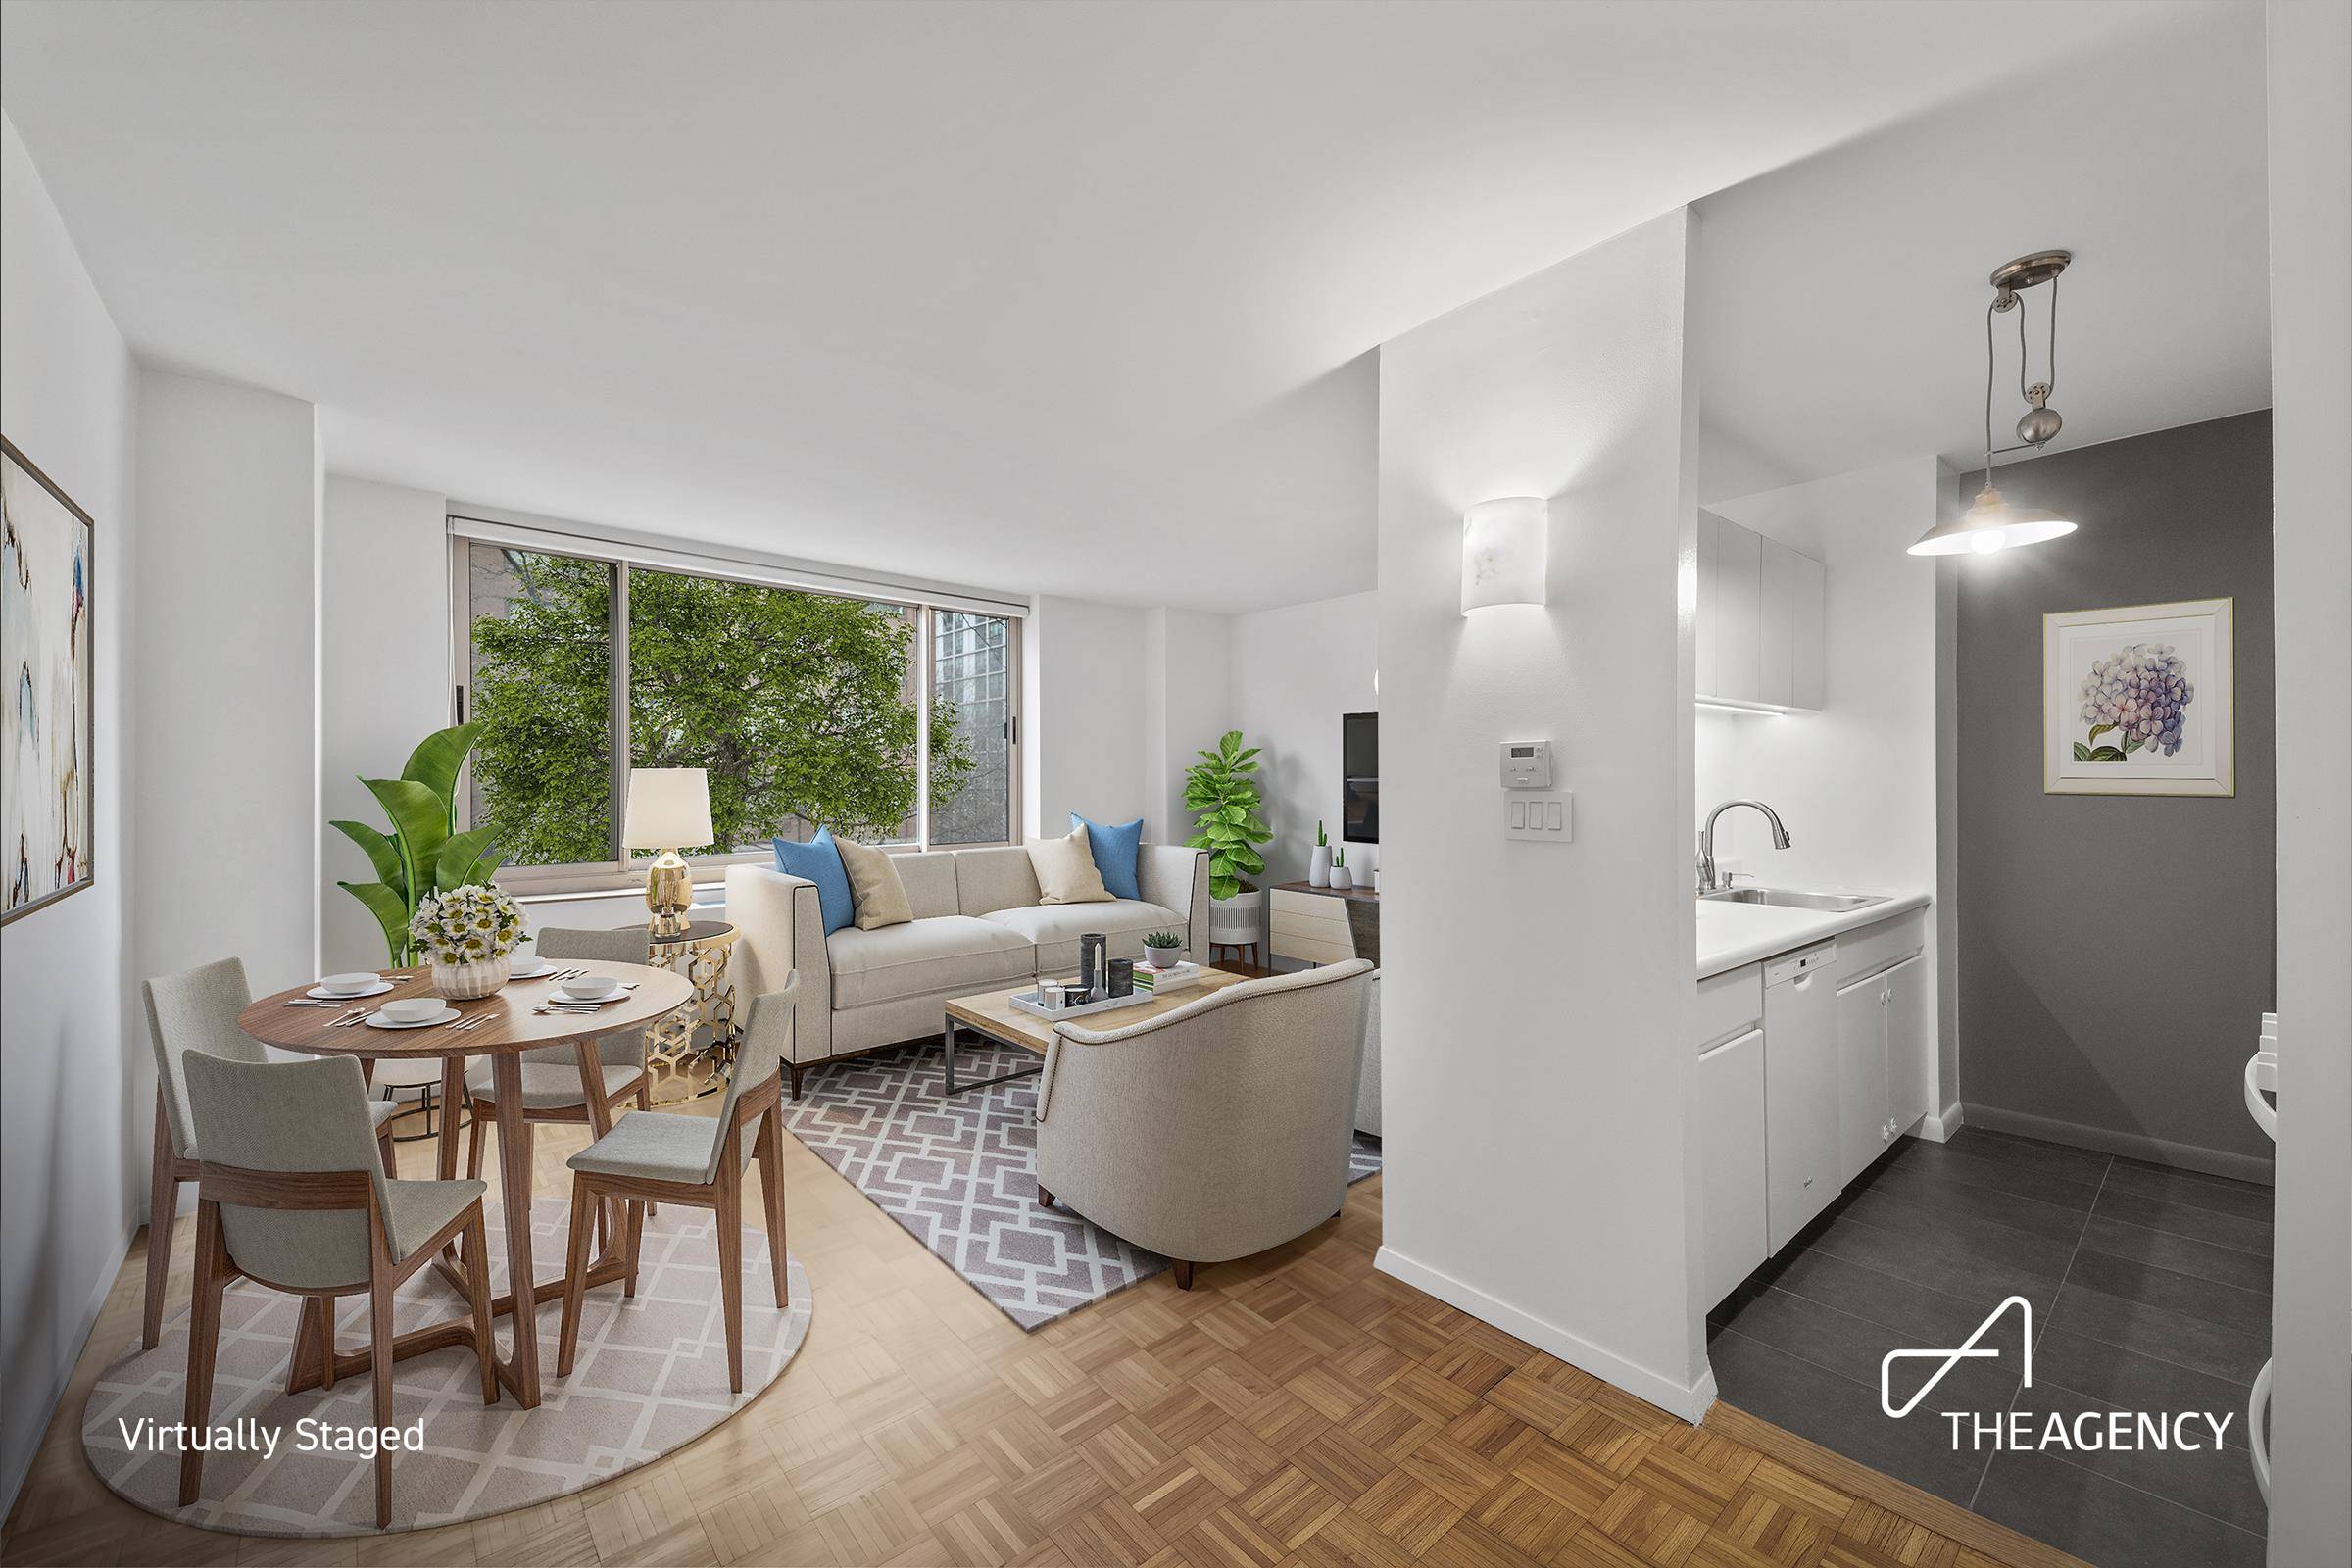 Welcome to apartment 3A, a move in ready one bedroom, with charming tree line views on a serene block of Battery Park City.